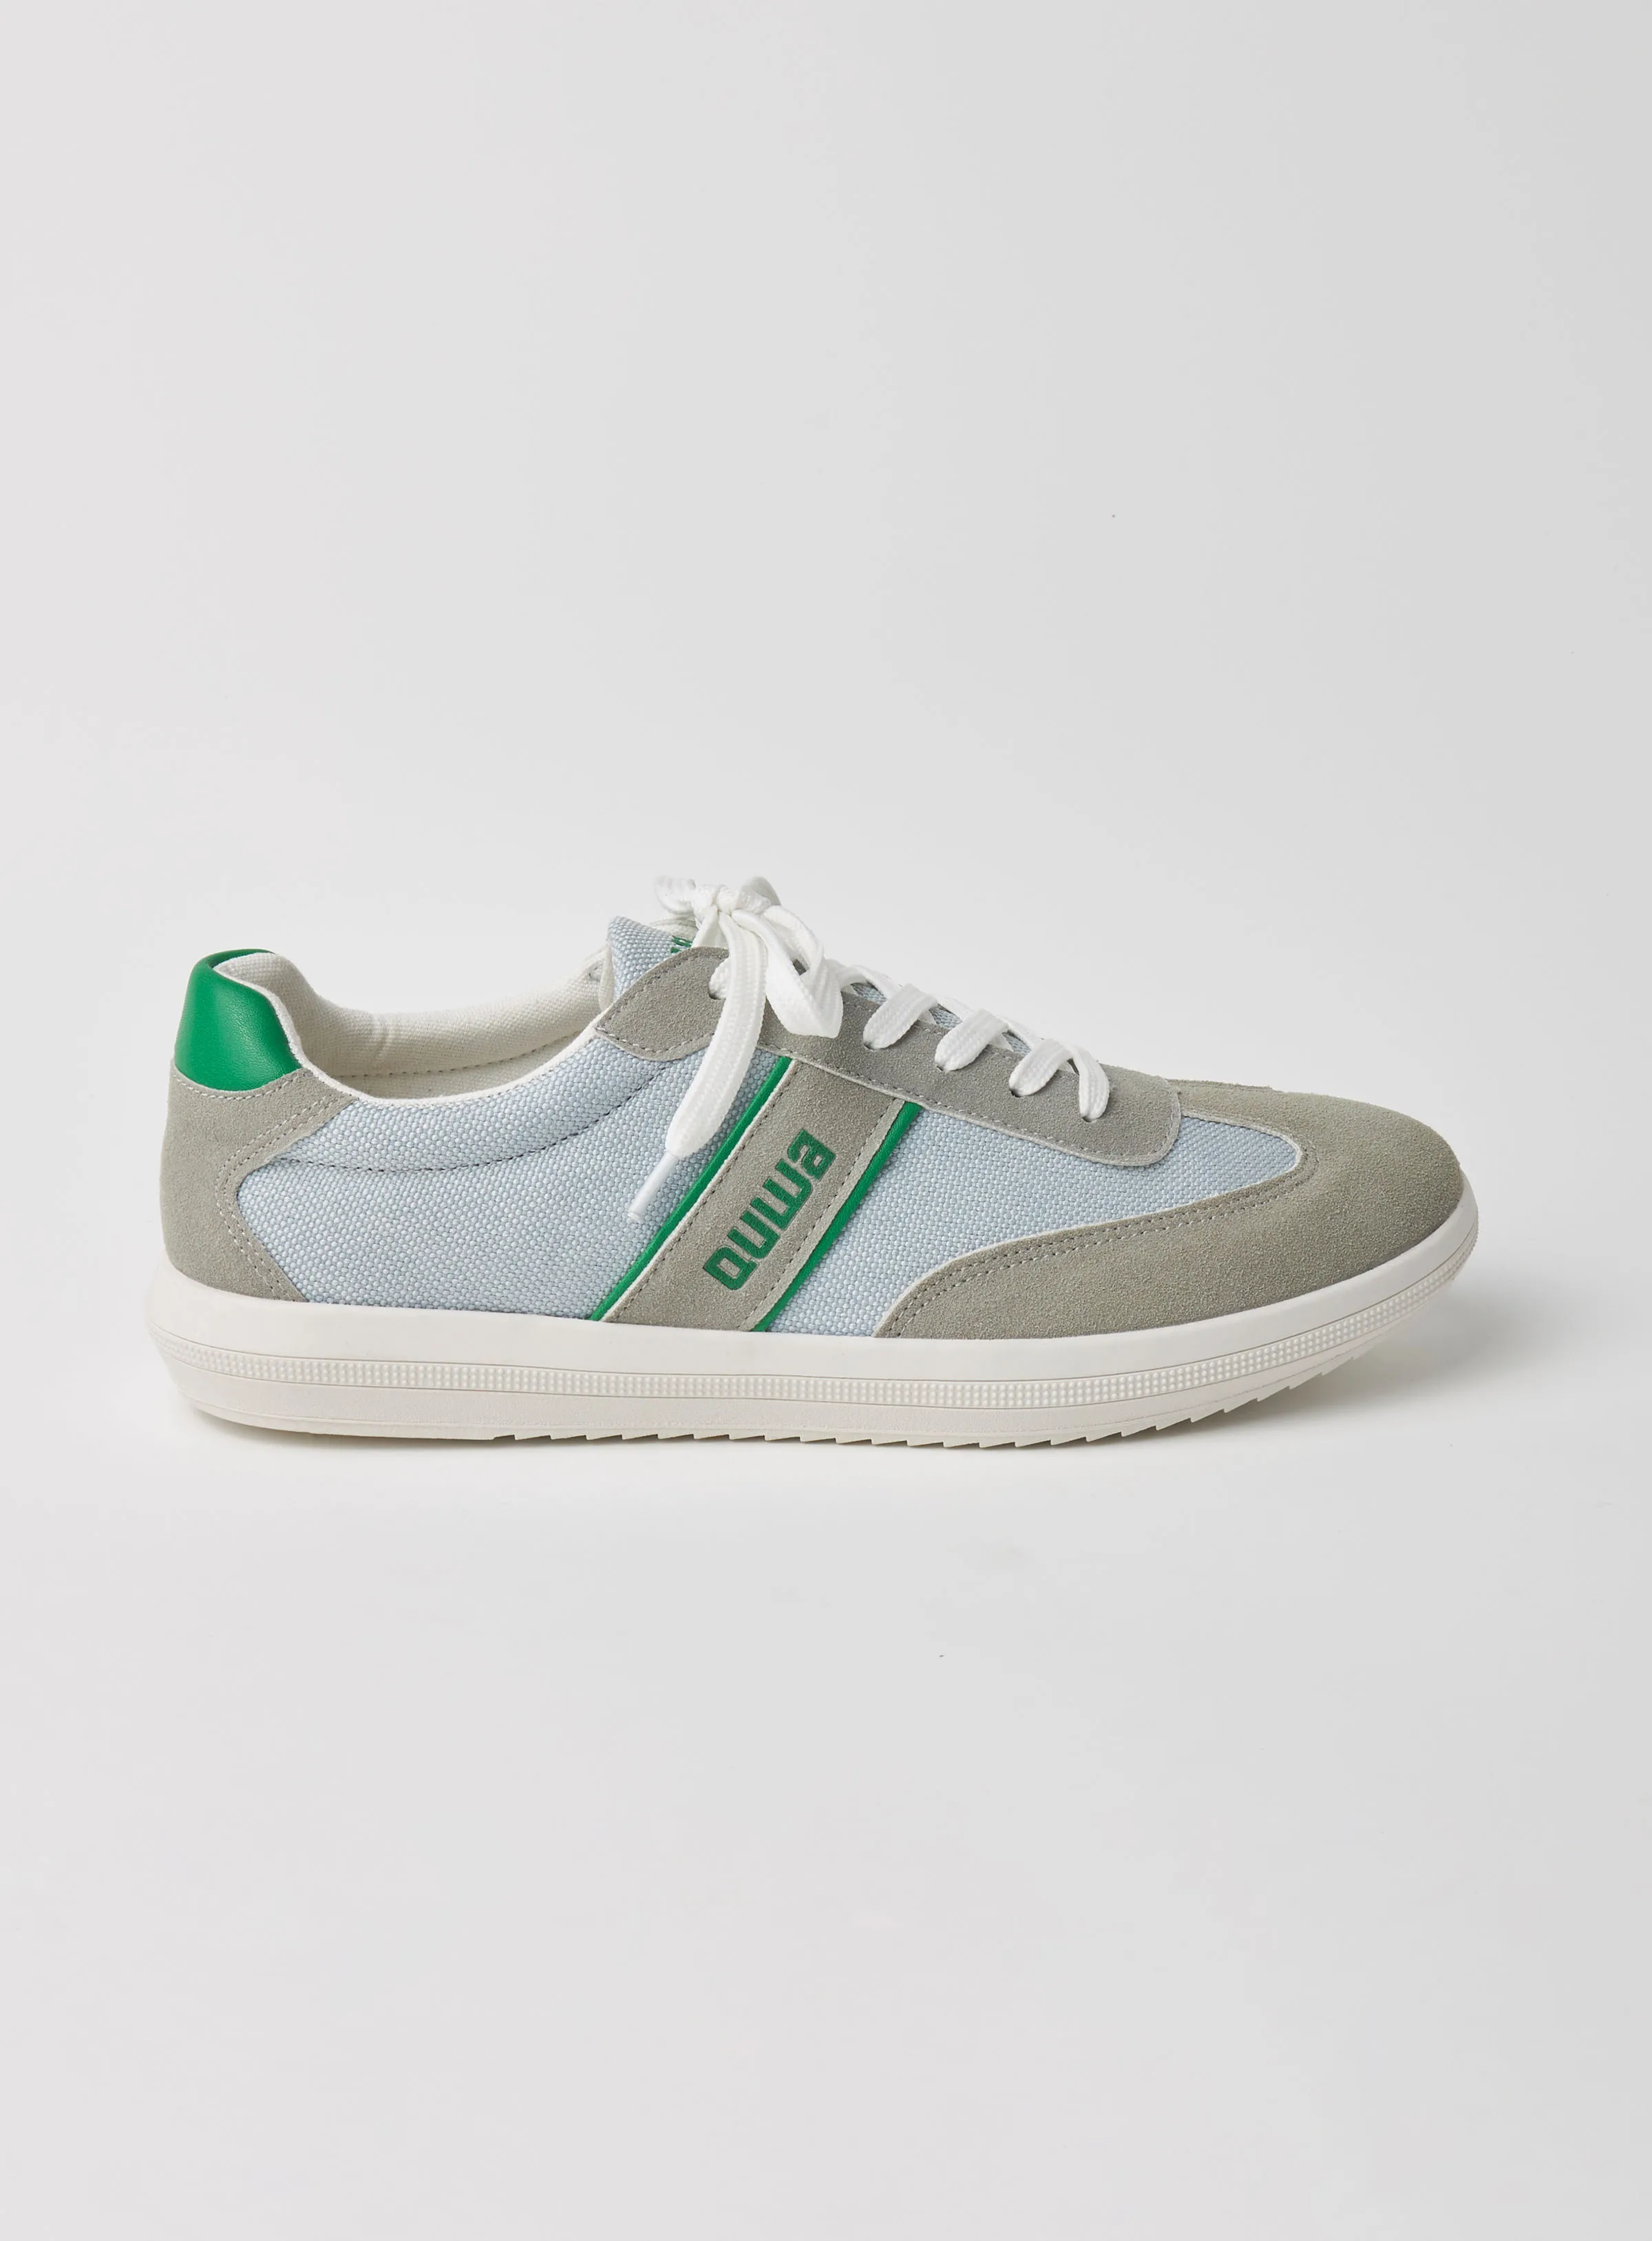 QUWA Casual Low-Top Sneakers White